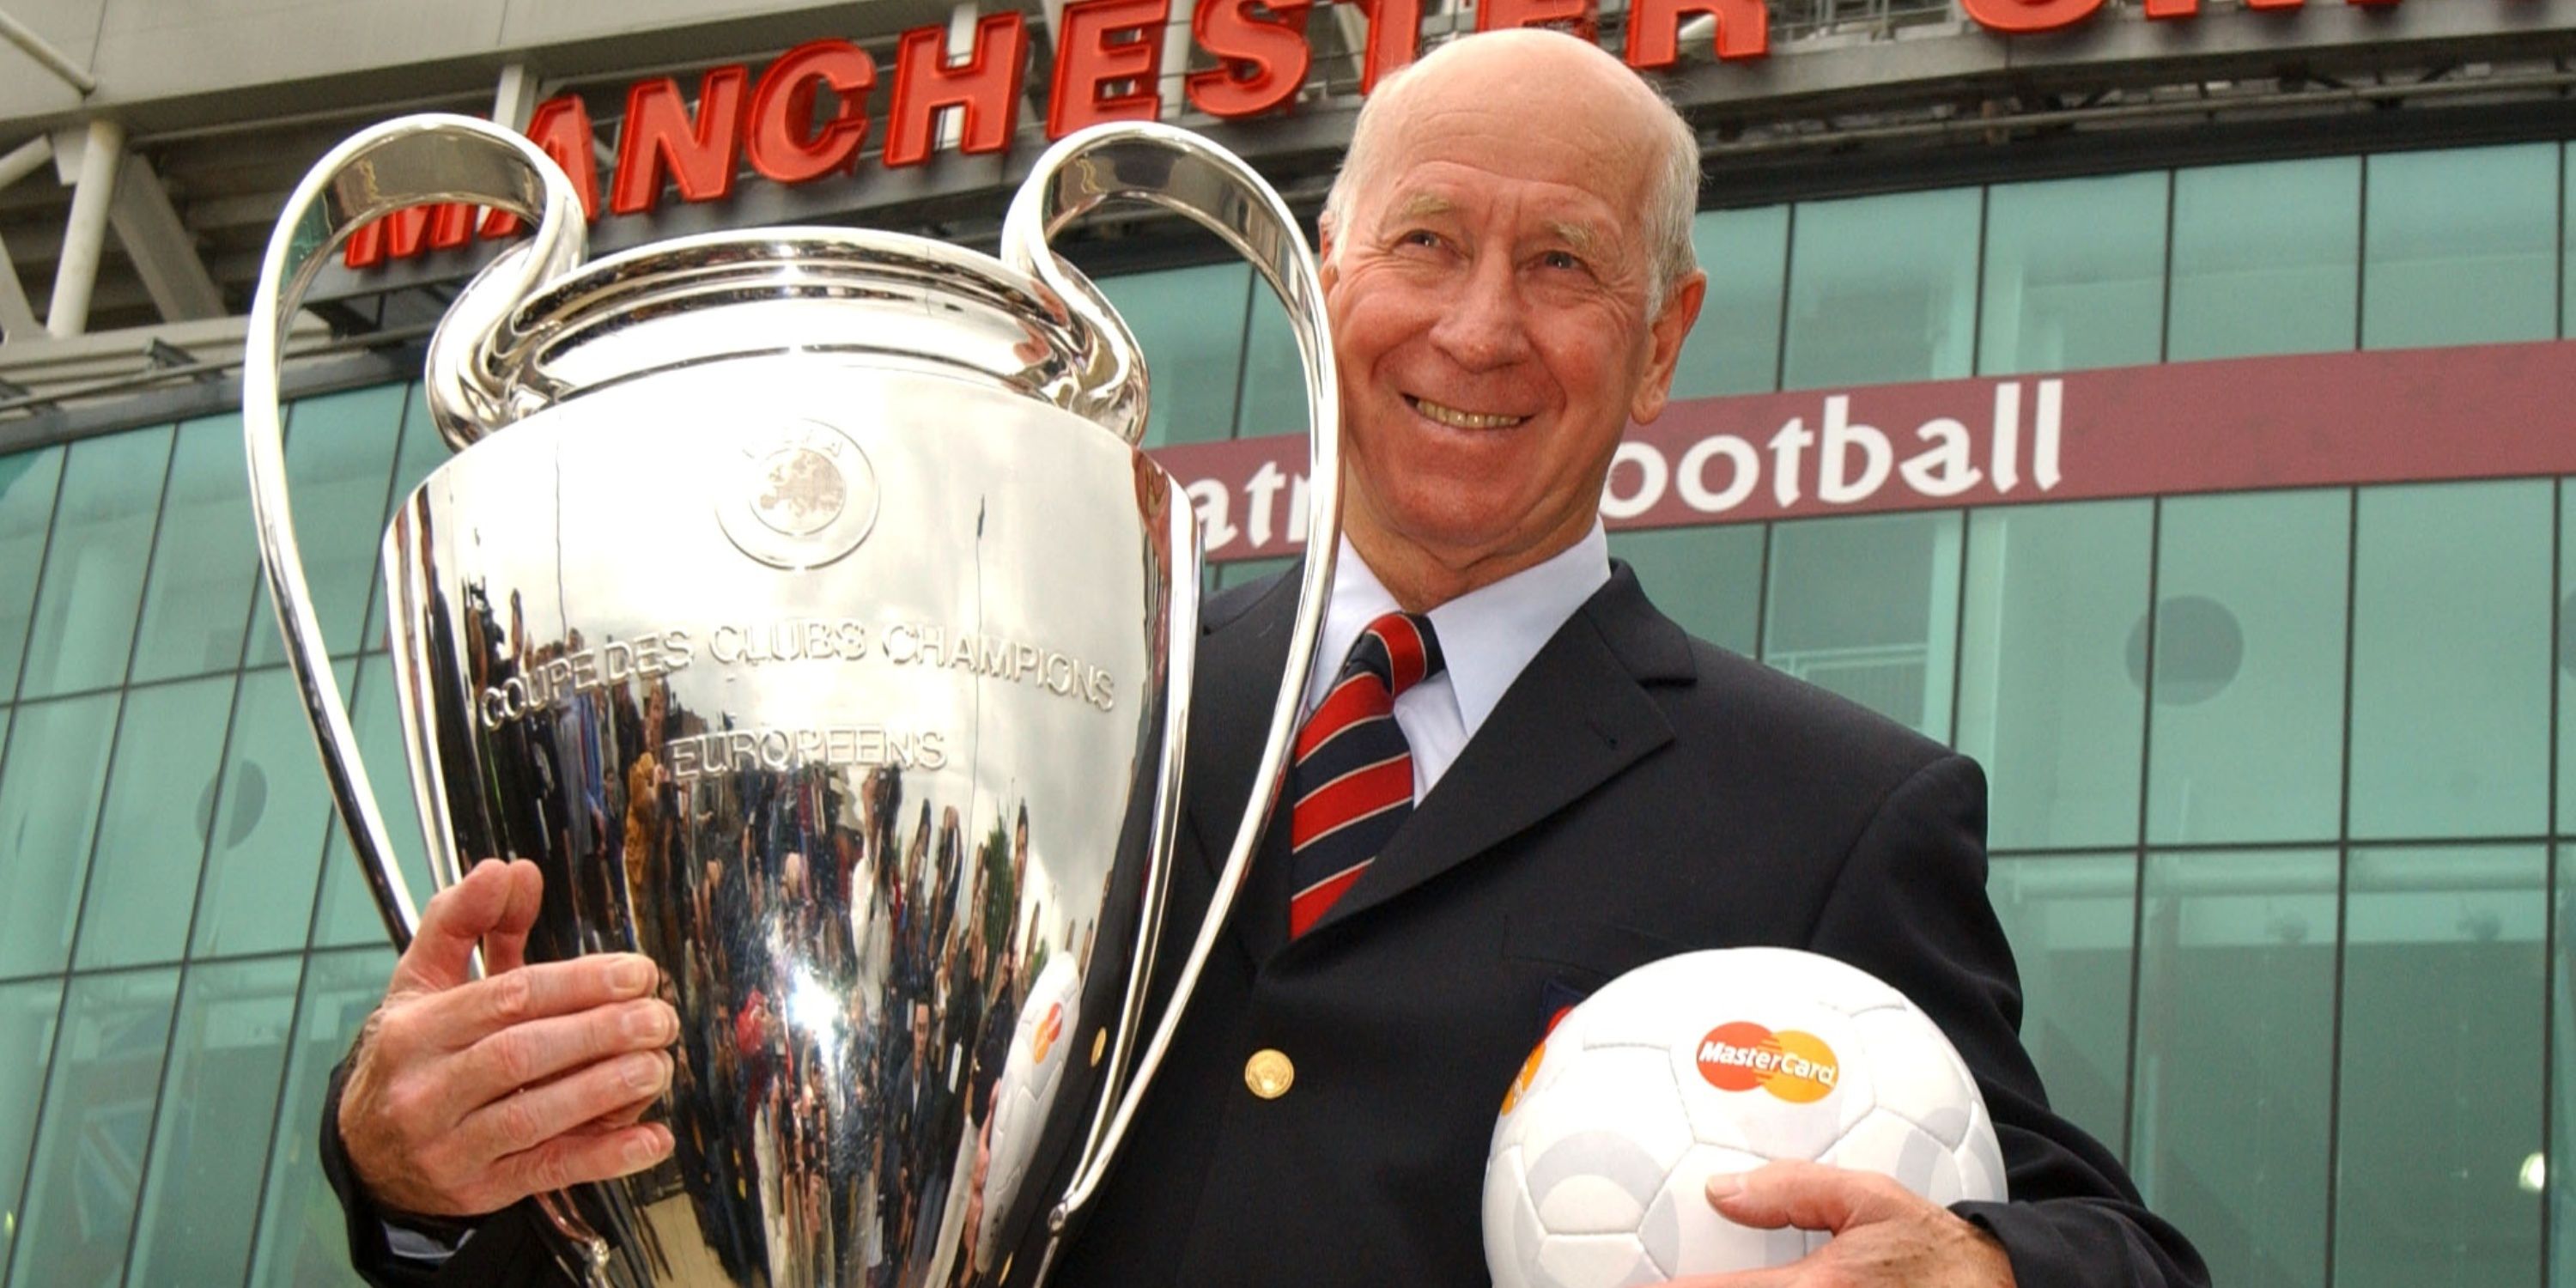 Beautiful video of Sir Bobby Charlton talking about the 1999 Champions League final